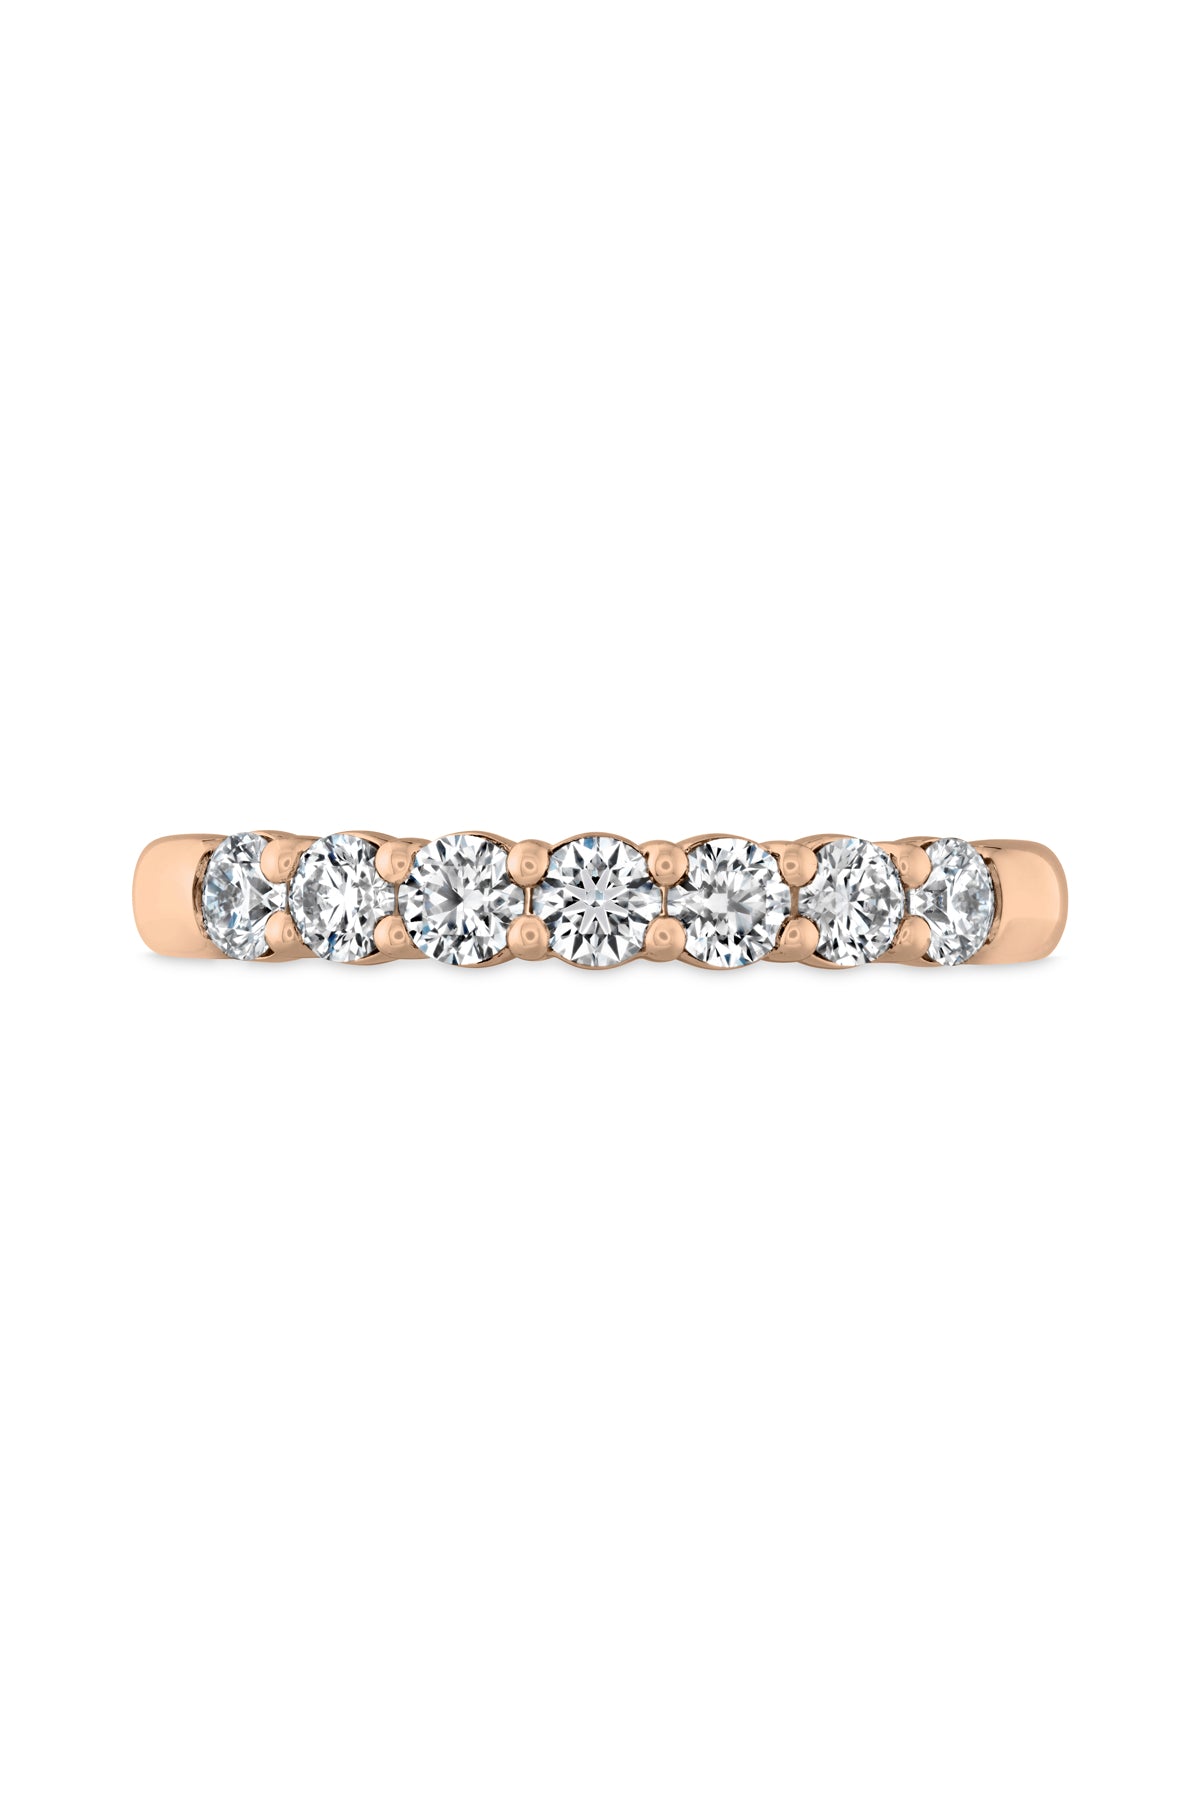 Signature 7 Stone Band From Hearts On Fire available at LeGassick Diamonds and Jewellery Gold Coast, Australia